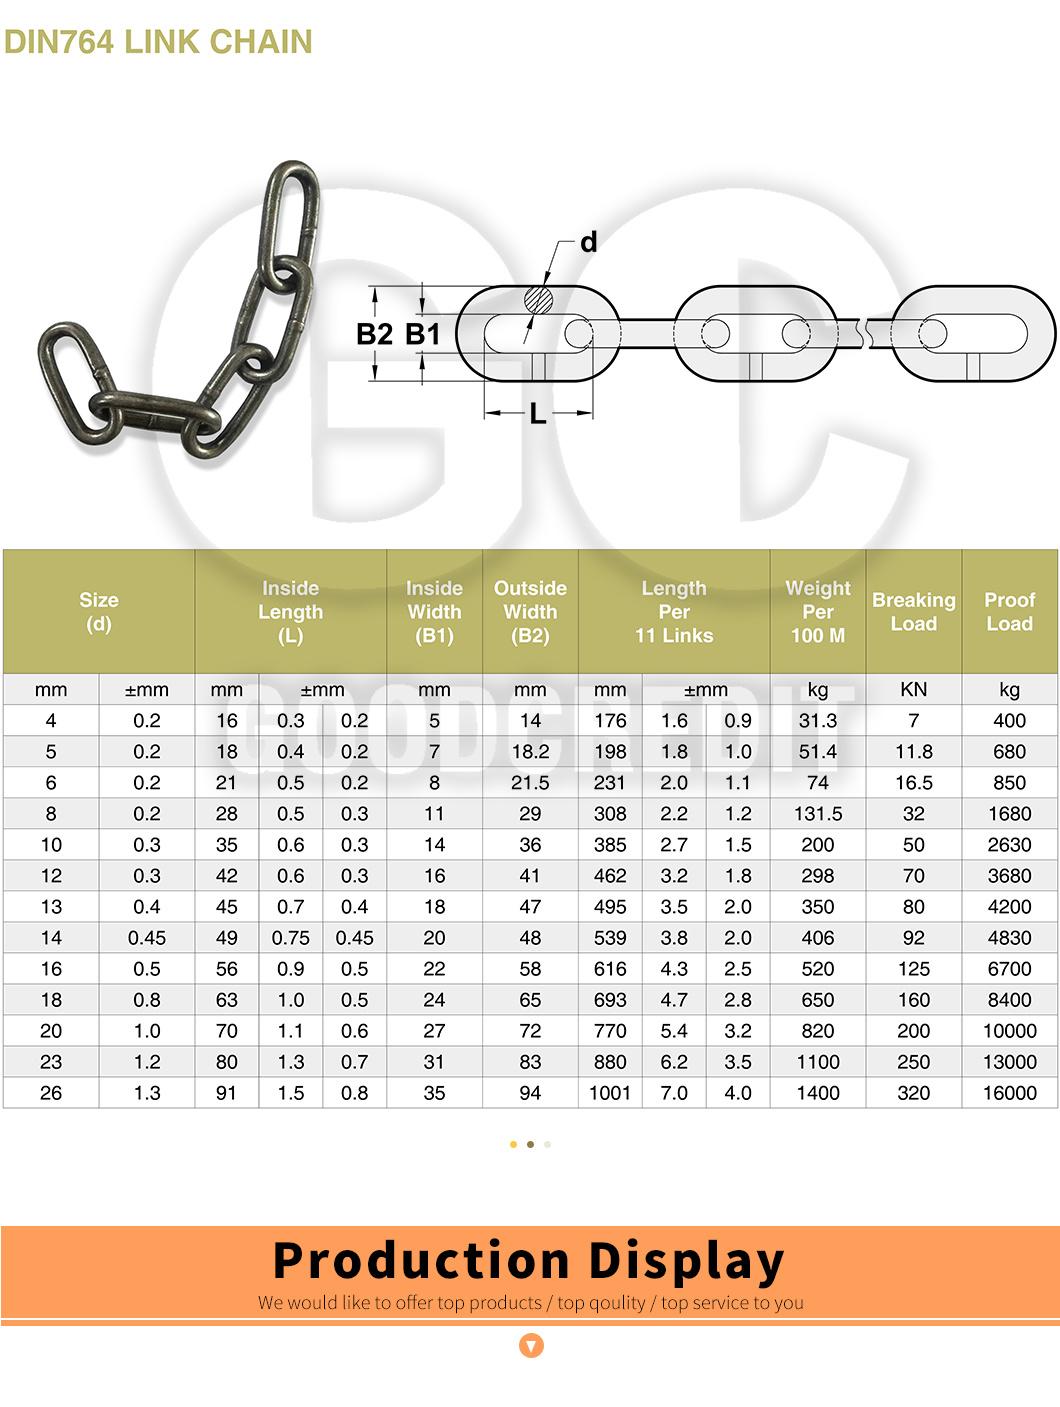 Steel or Stainless Steel DIN 763 Welded Link Chain